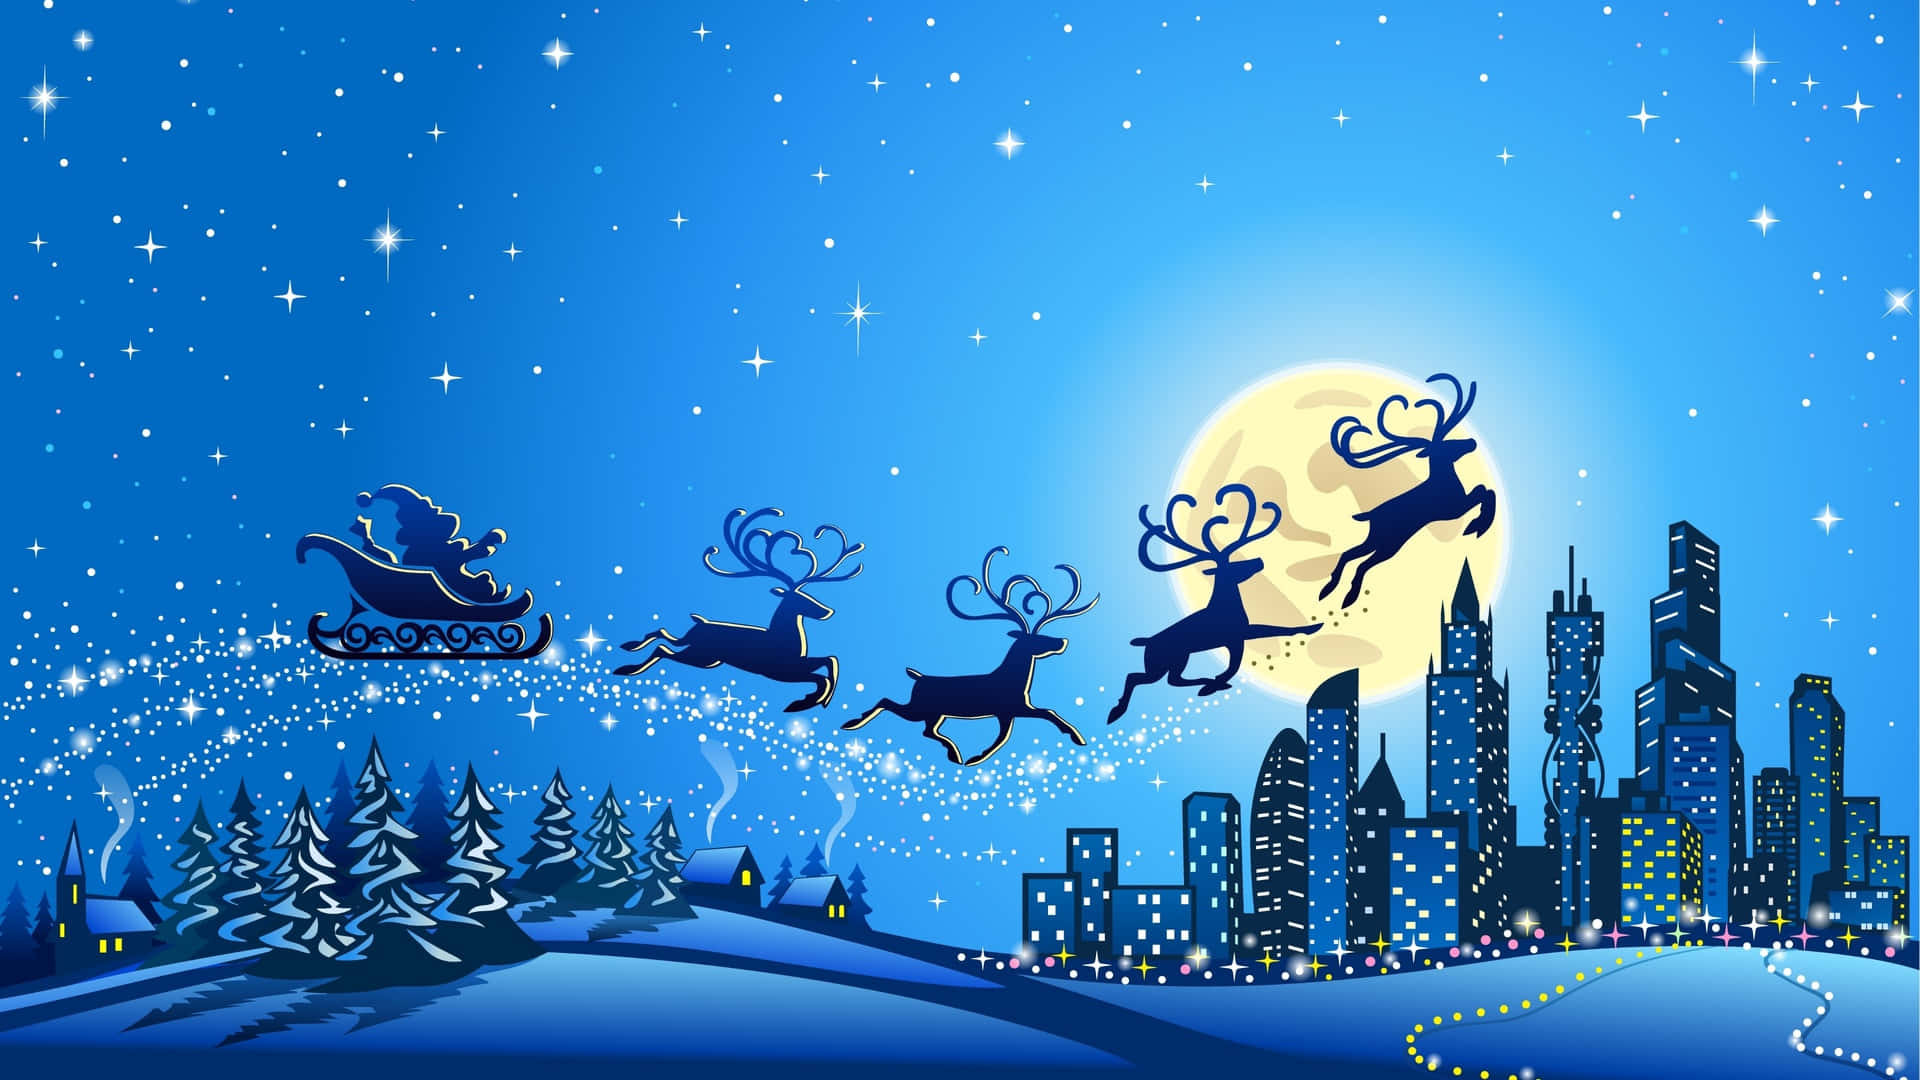 Deck the Halls with Technology this Christmas! Wallpaper